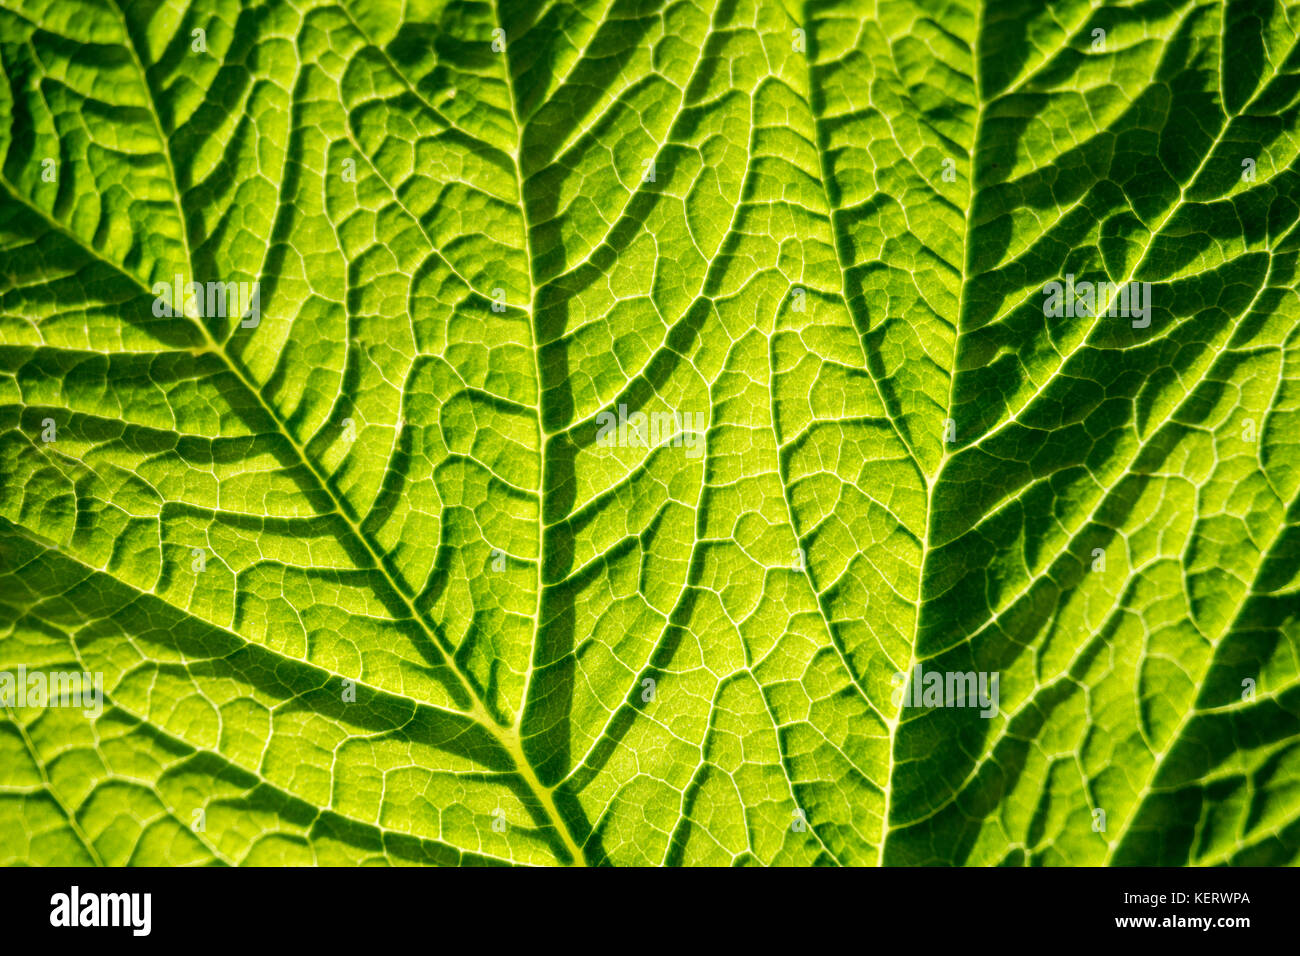 Detail of Green Leaf Stock Photo